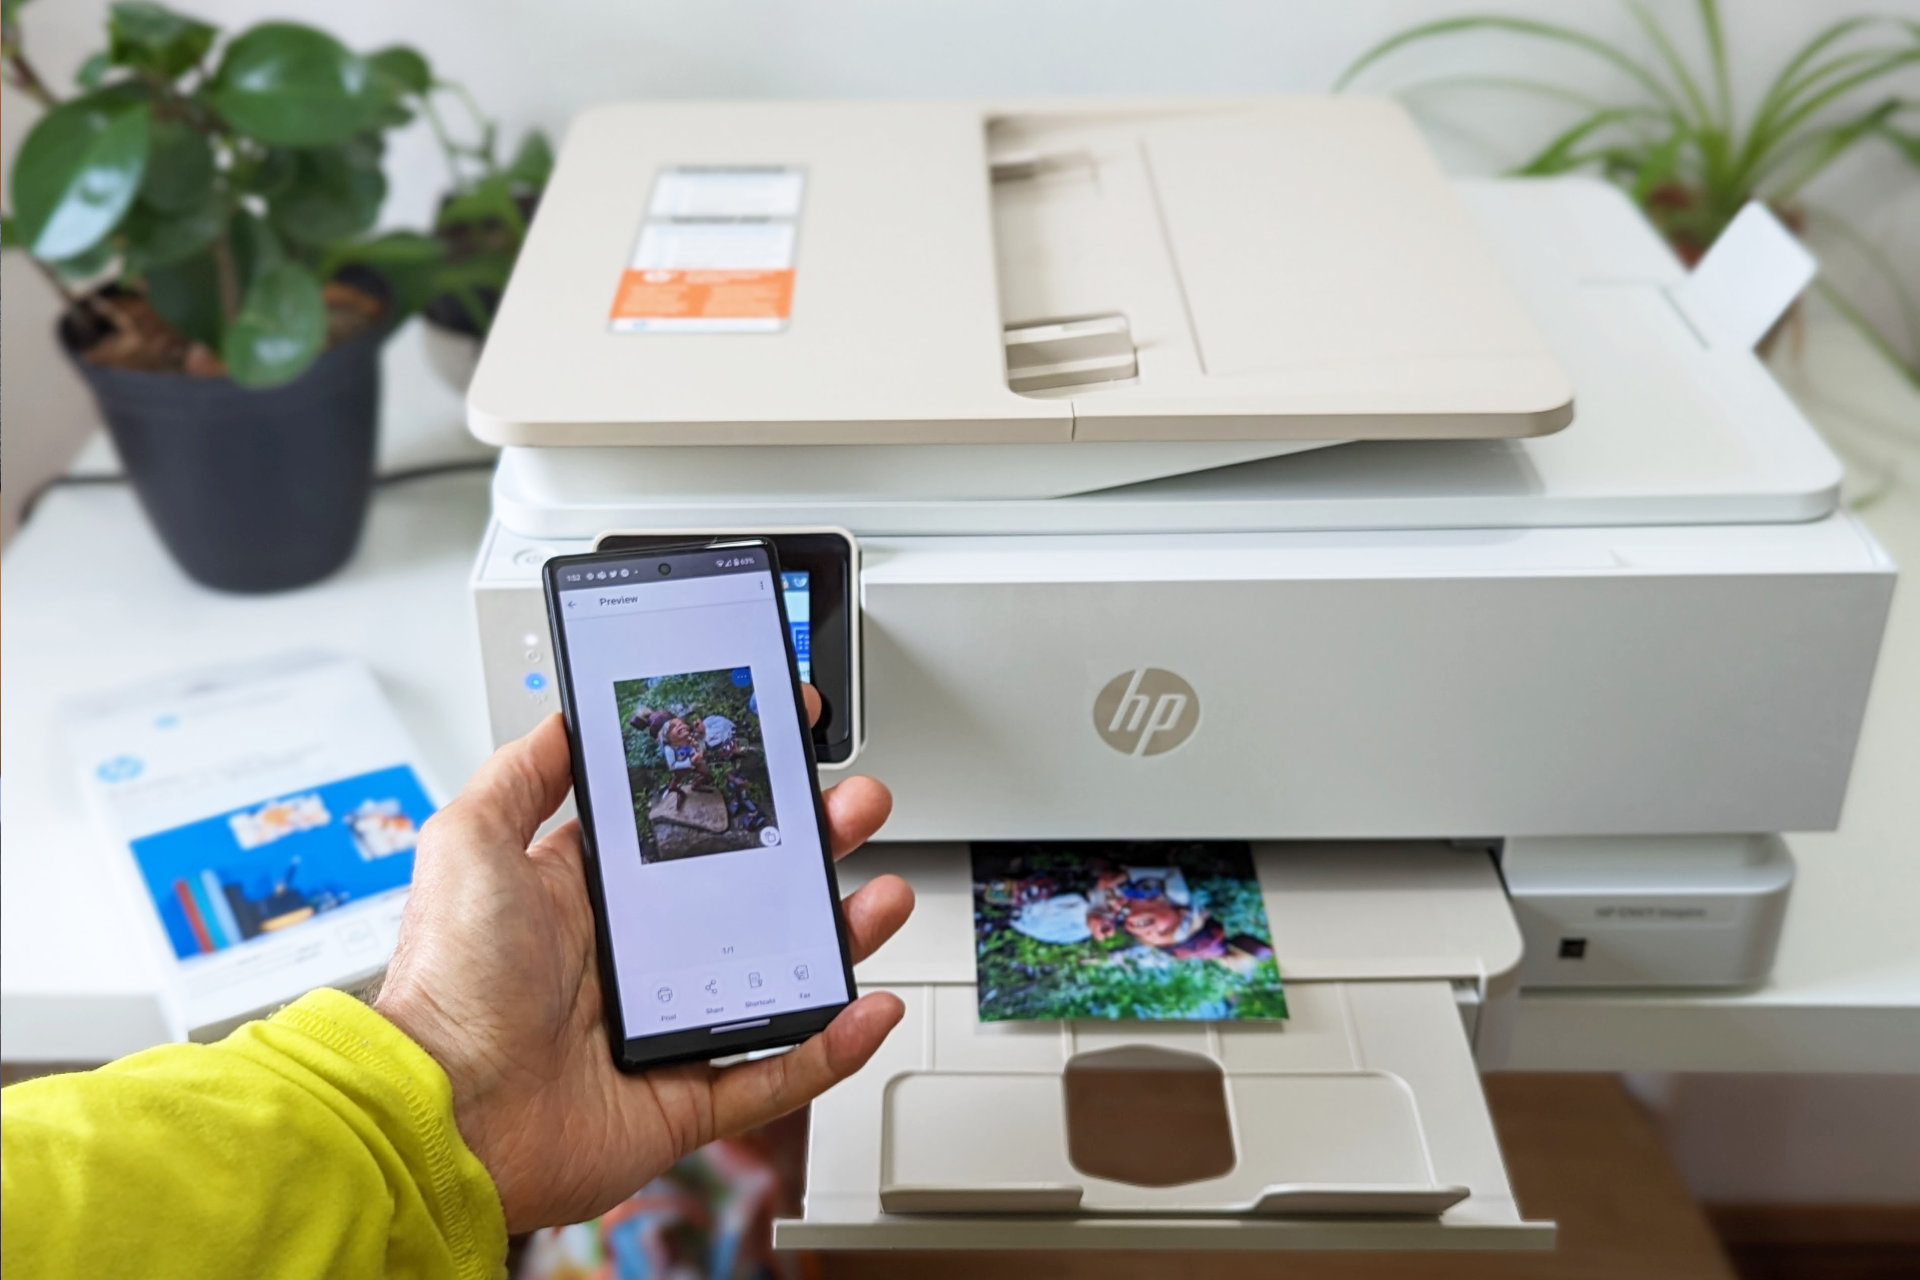 HP OfficeJet Pro 7720 Review: Great performance for home or small office